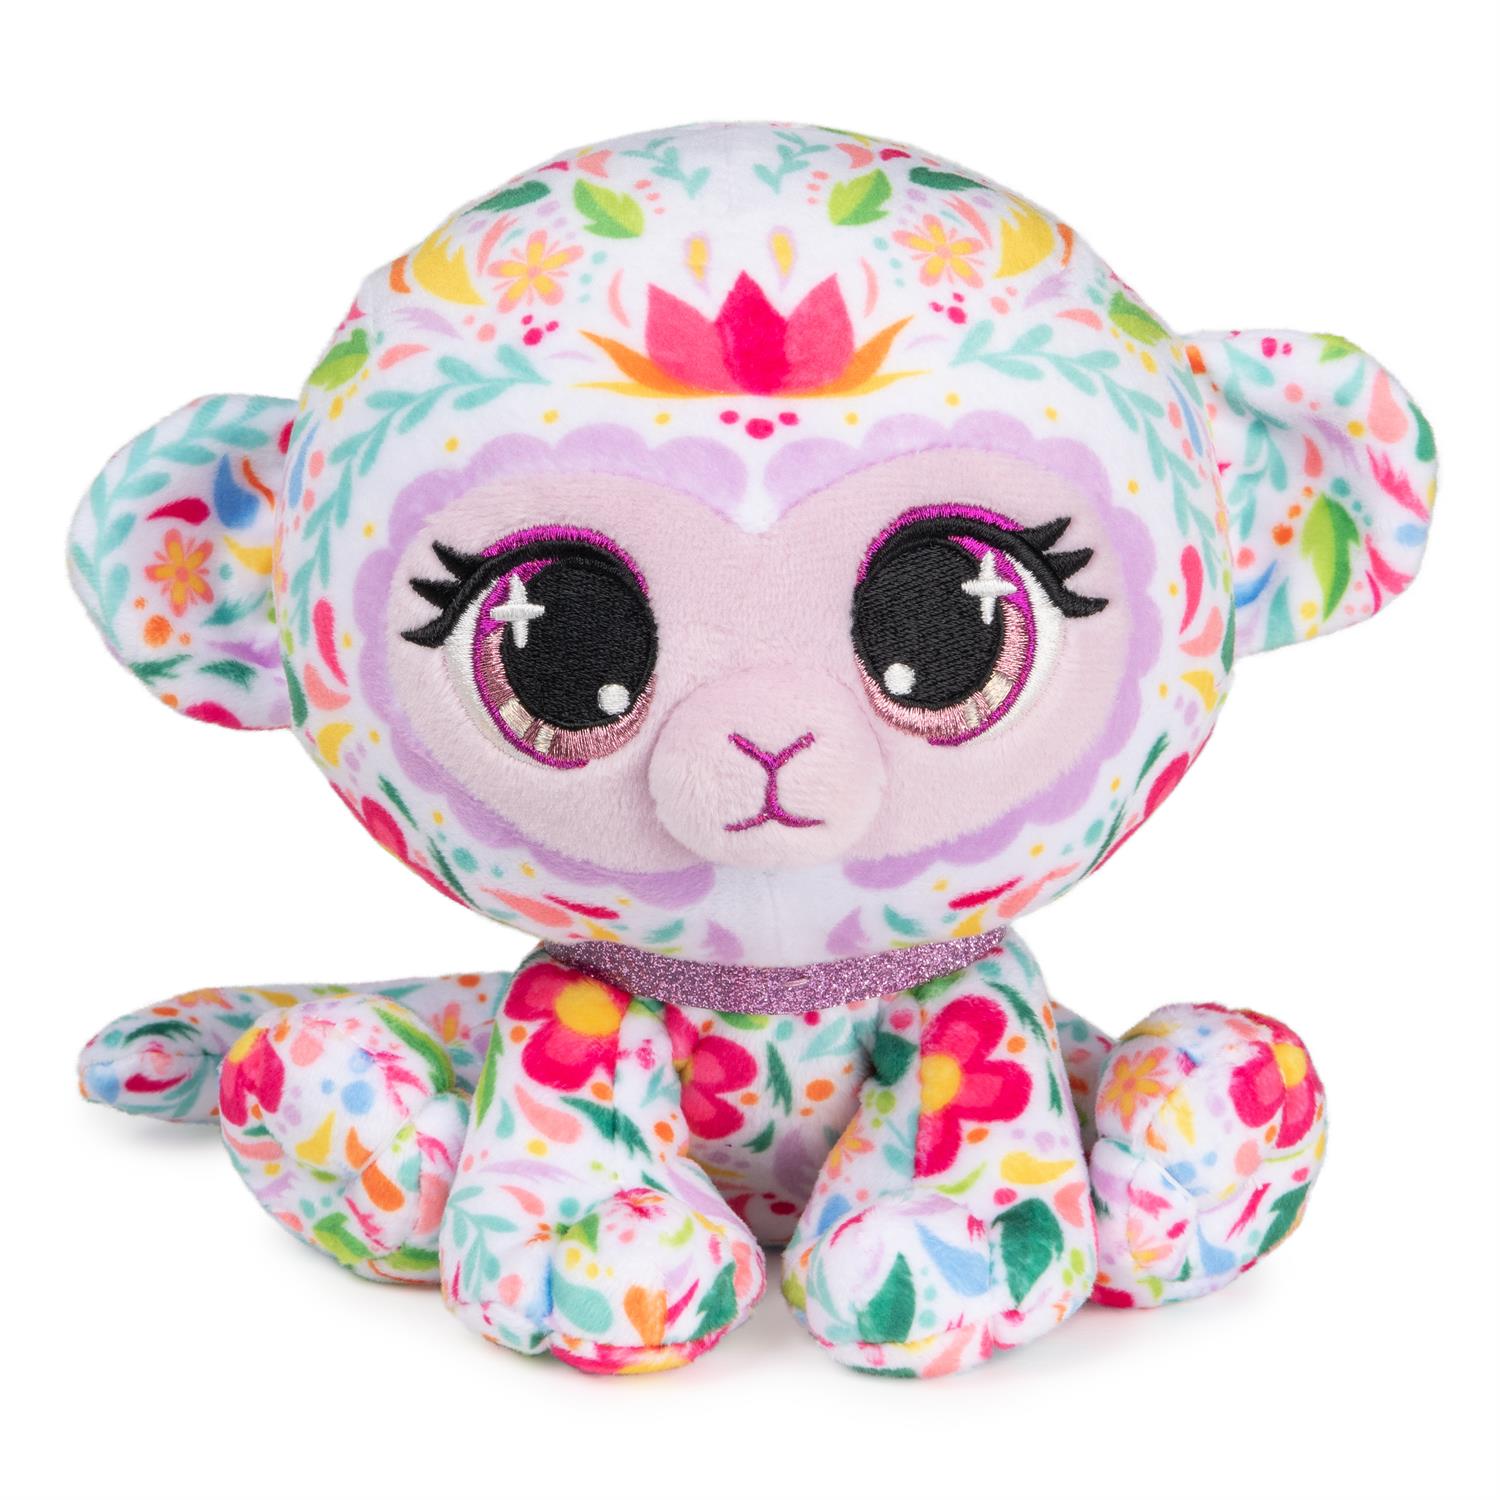 Sugar Apple Fairy Tale Merch  Buy from Goods Republic - Online Store for  Official Japanese Merchandise, Featuring Plush